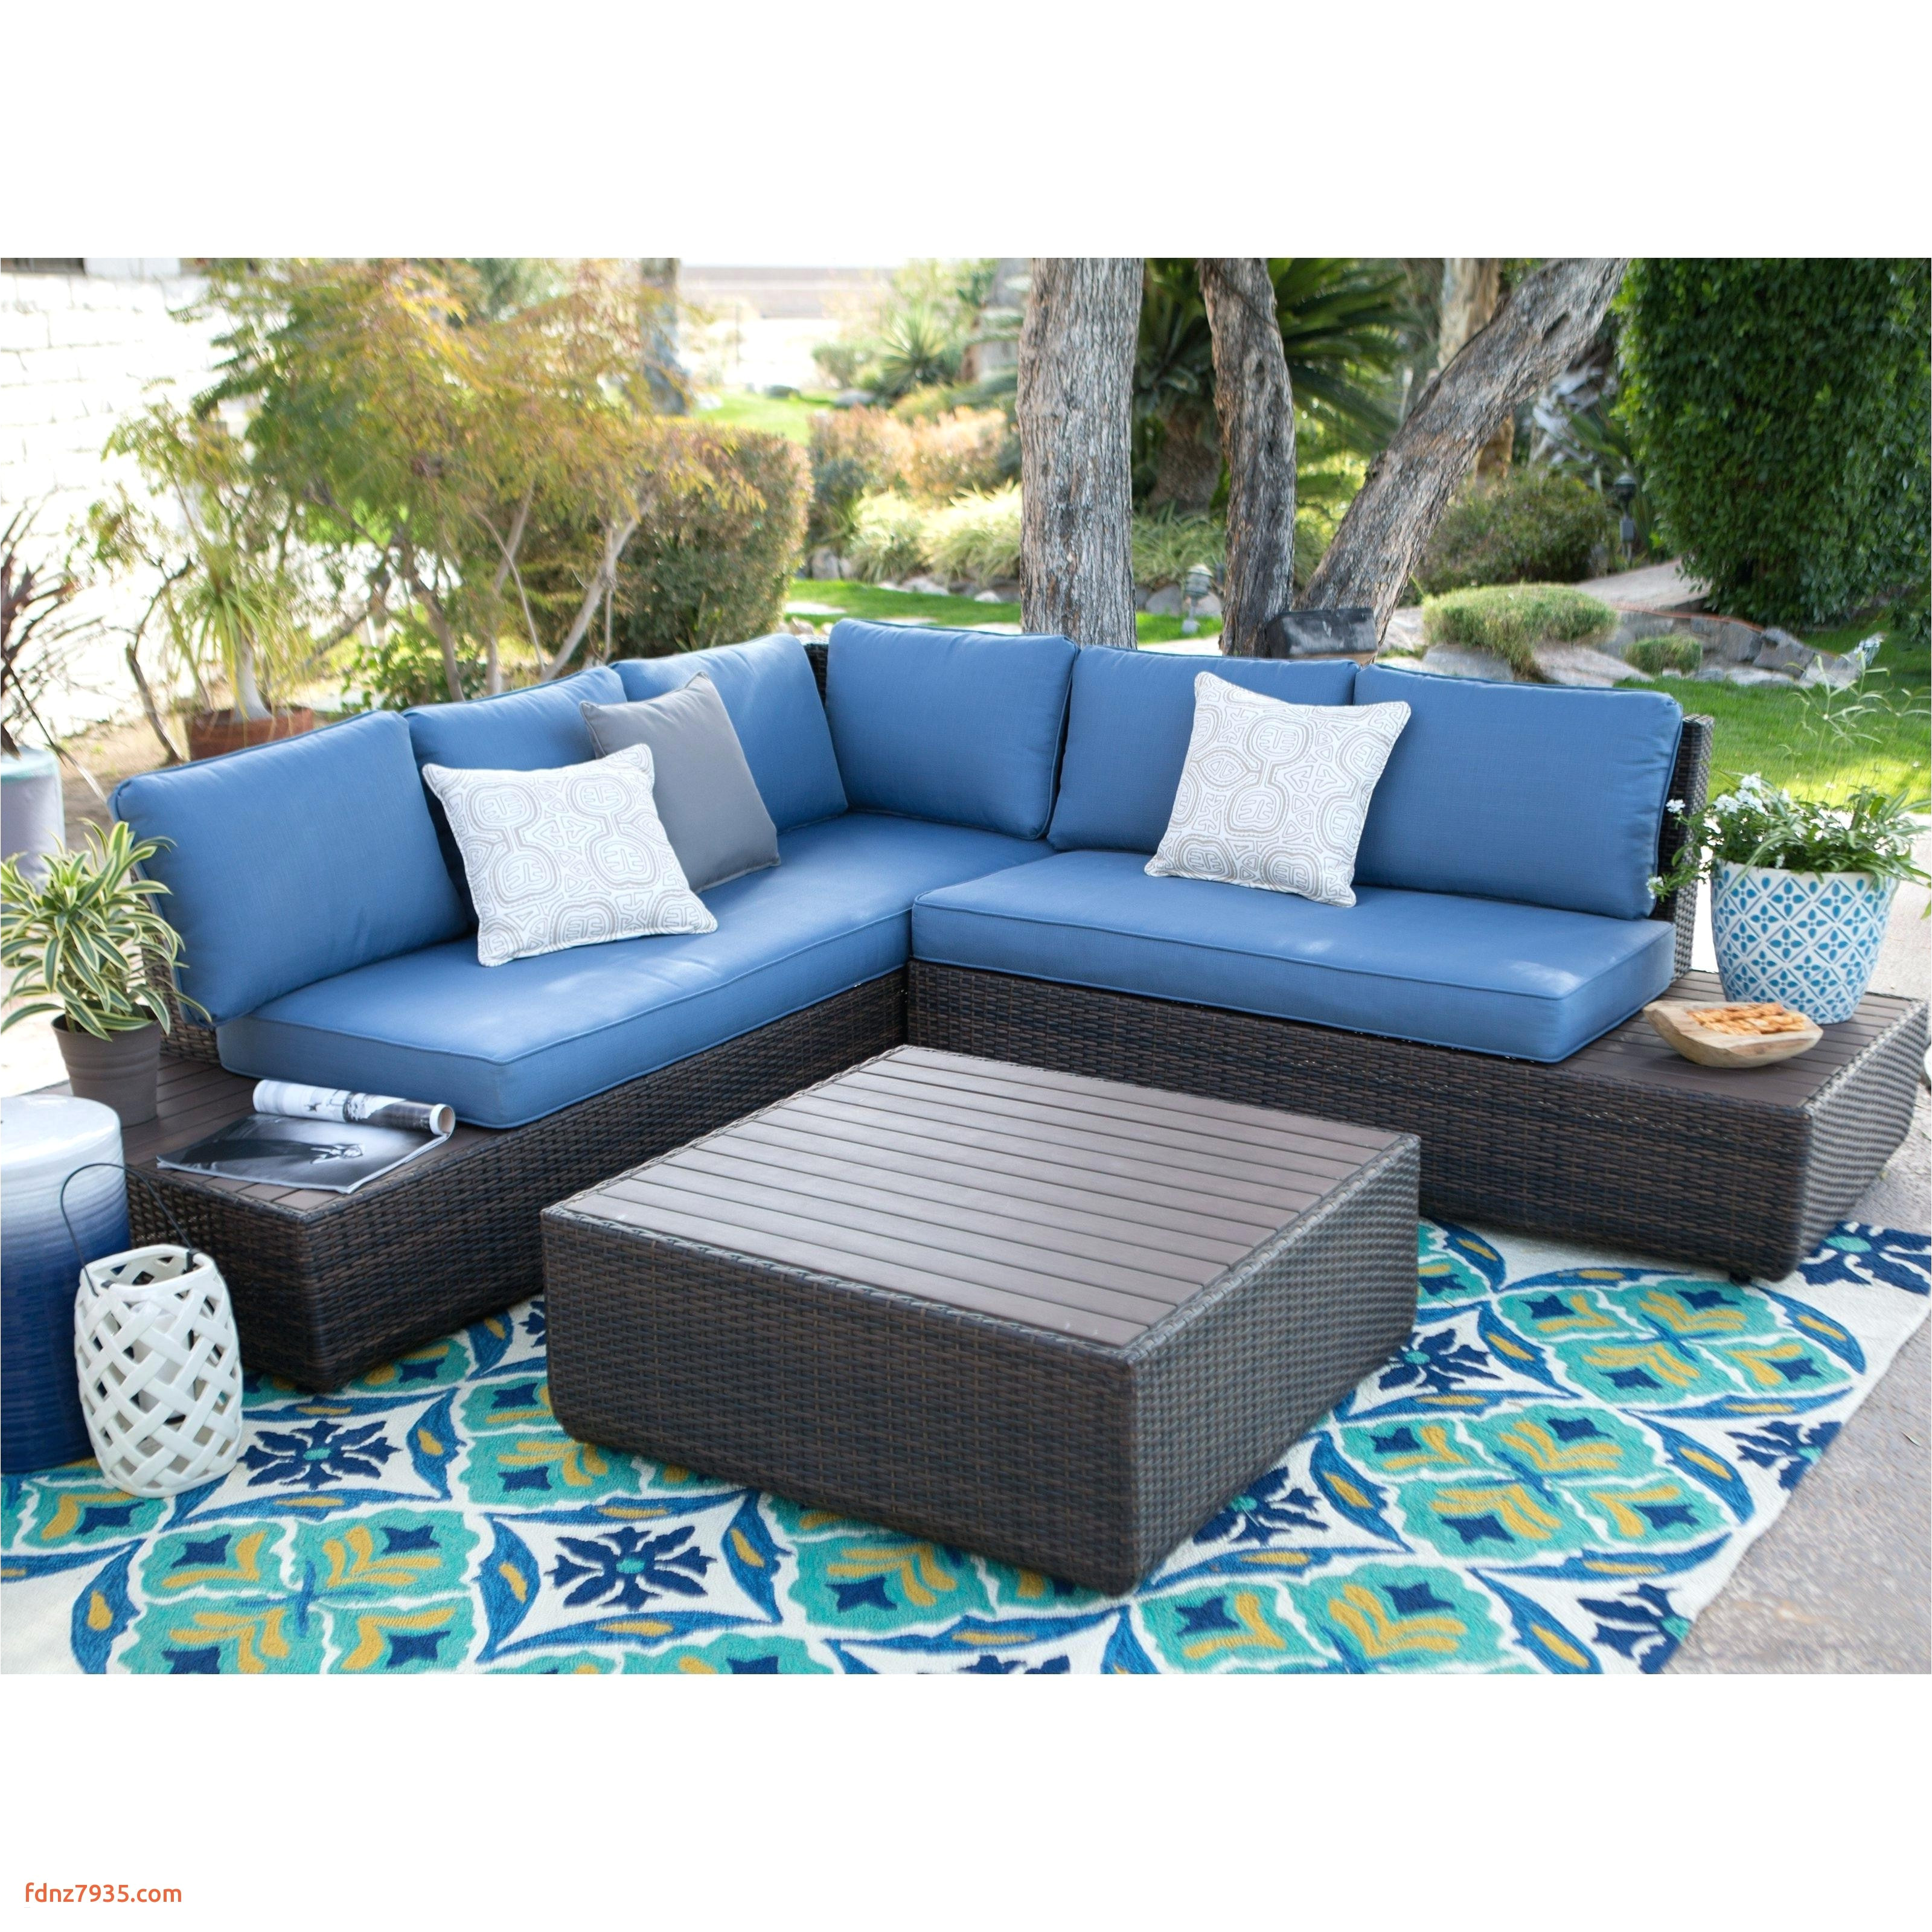 outdoor sectional replacement cushions lovely turquoise patio furniture beautiful wicker outdoor sofa 0d patio